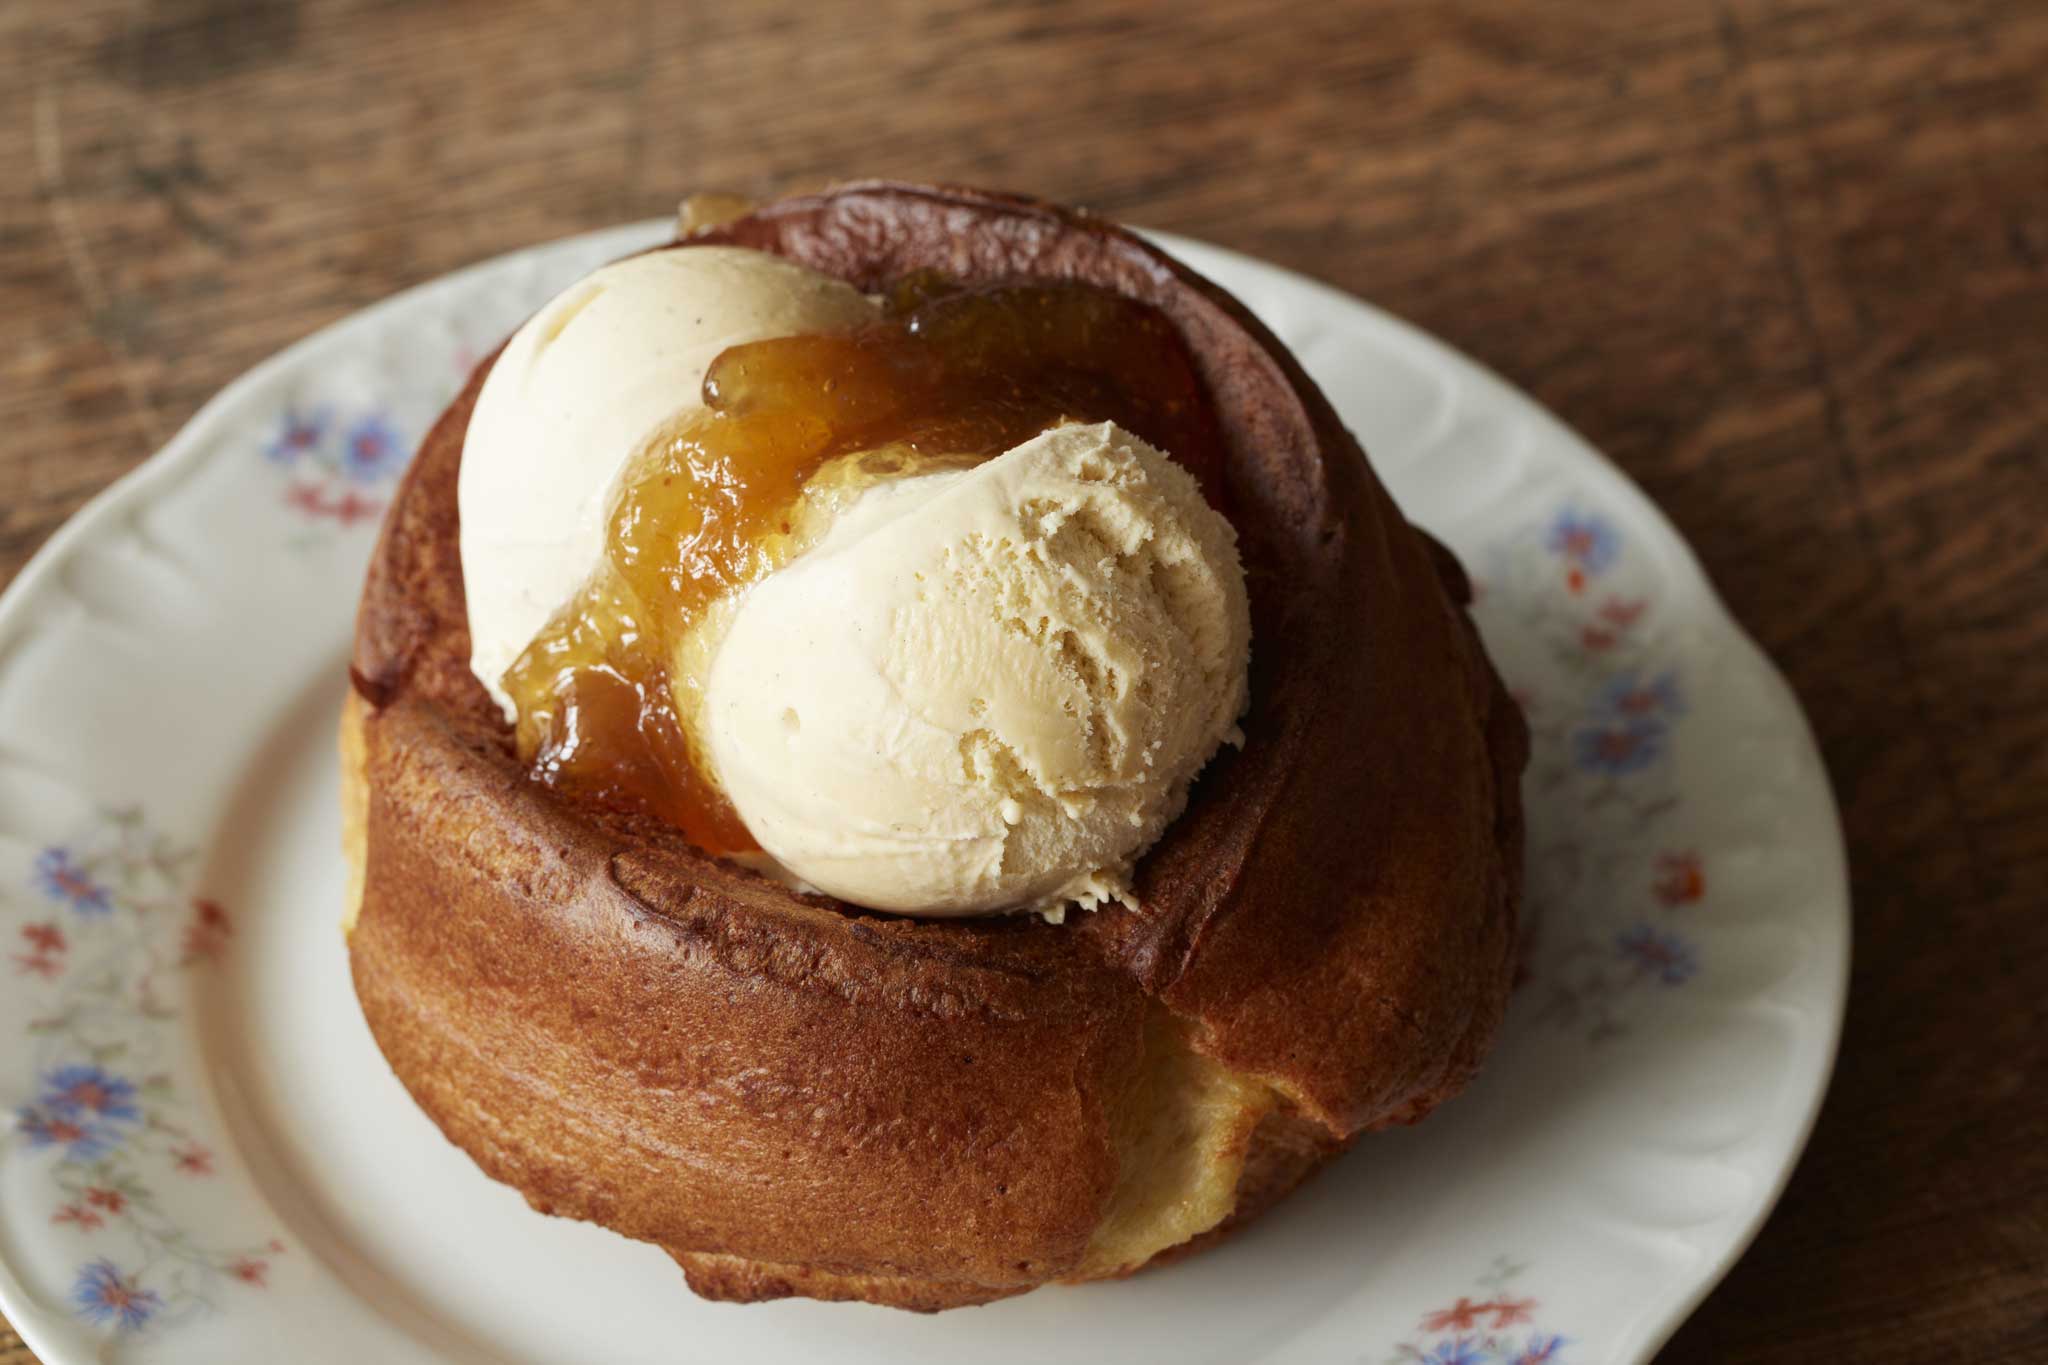 Sweet treat: Yorkshire pudding with ice-cream and marmalade